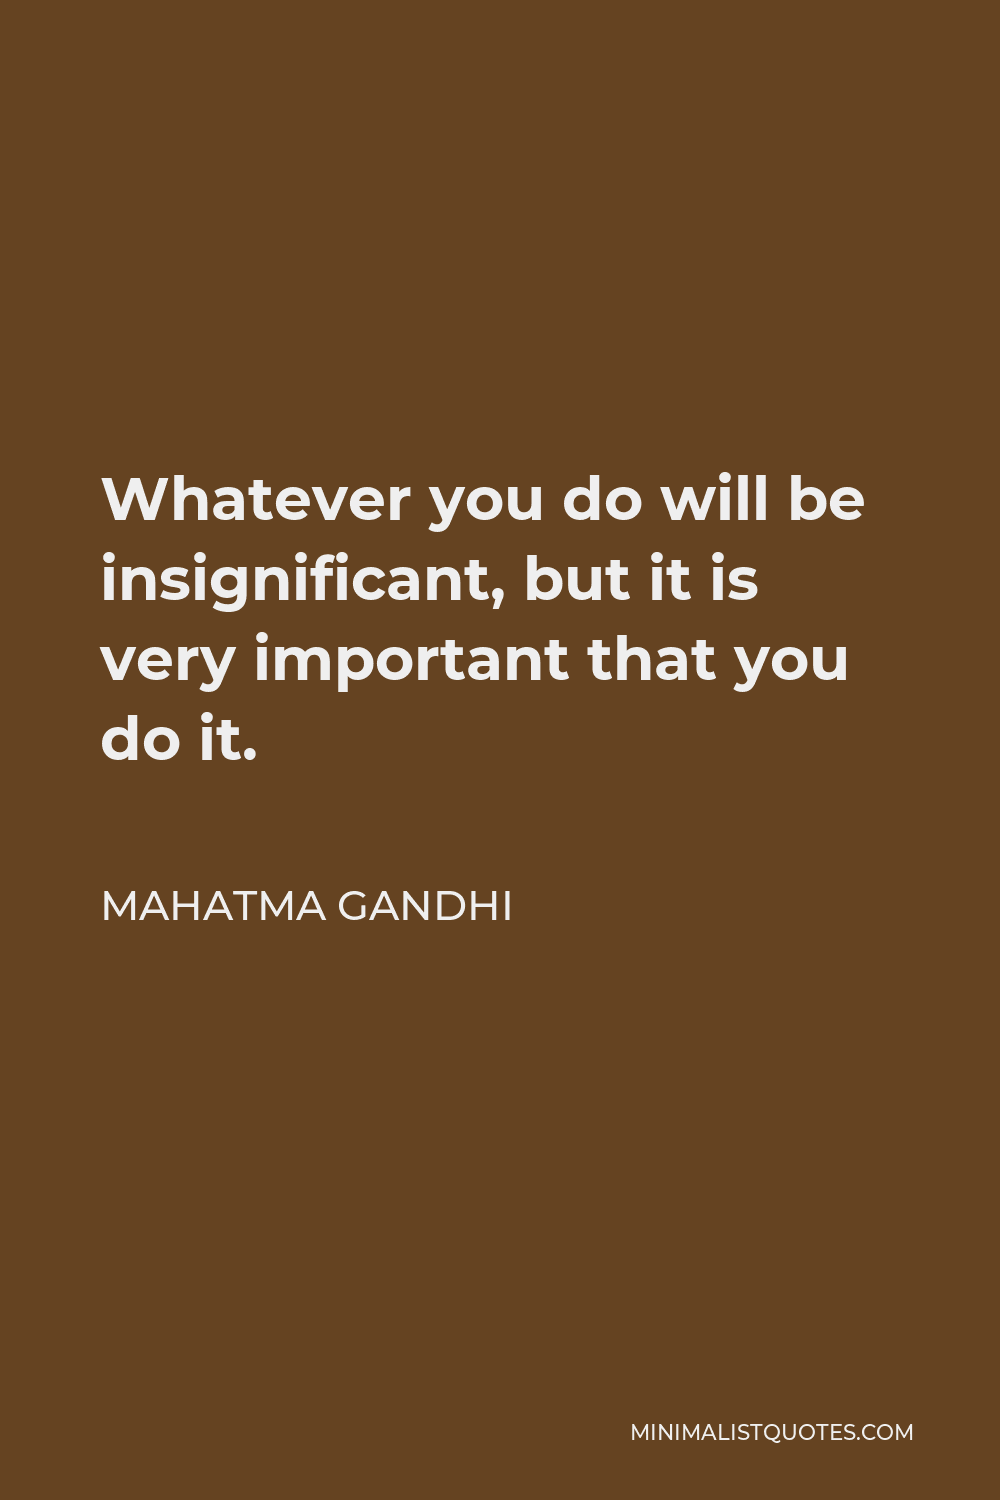 Mahatma Gandhi Quote: Whatever you do will be insignificant, but it is ...